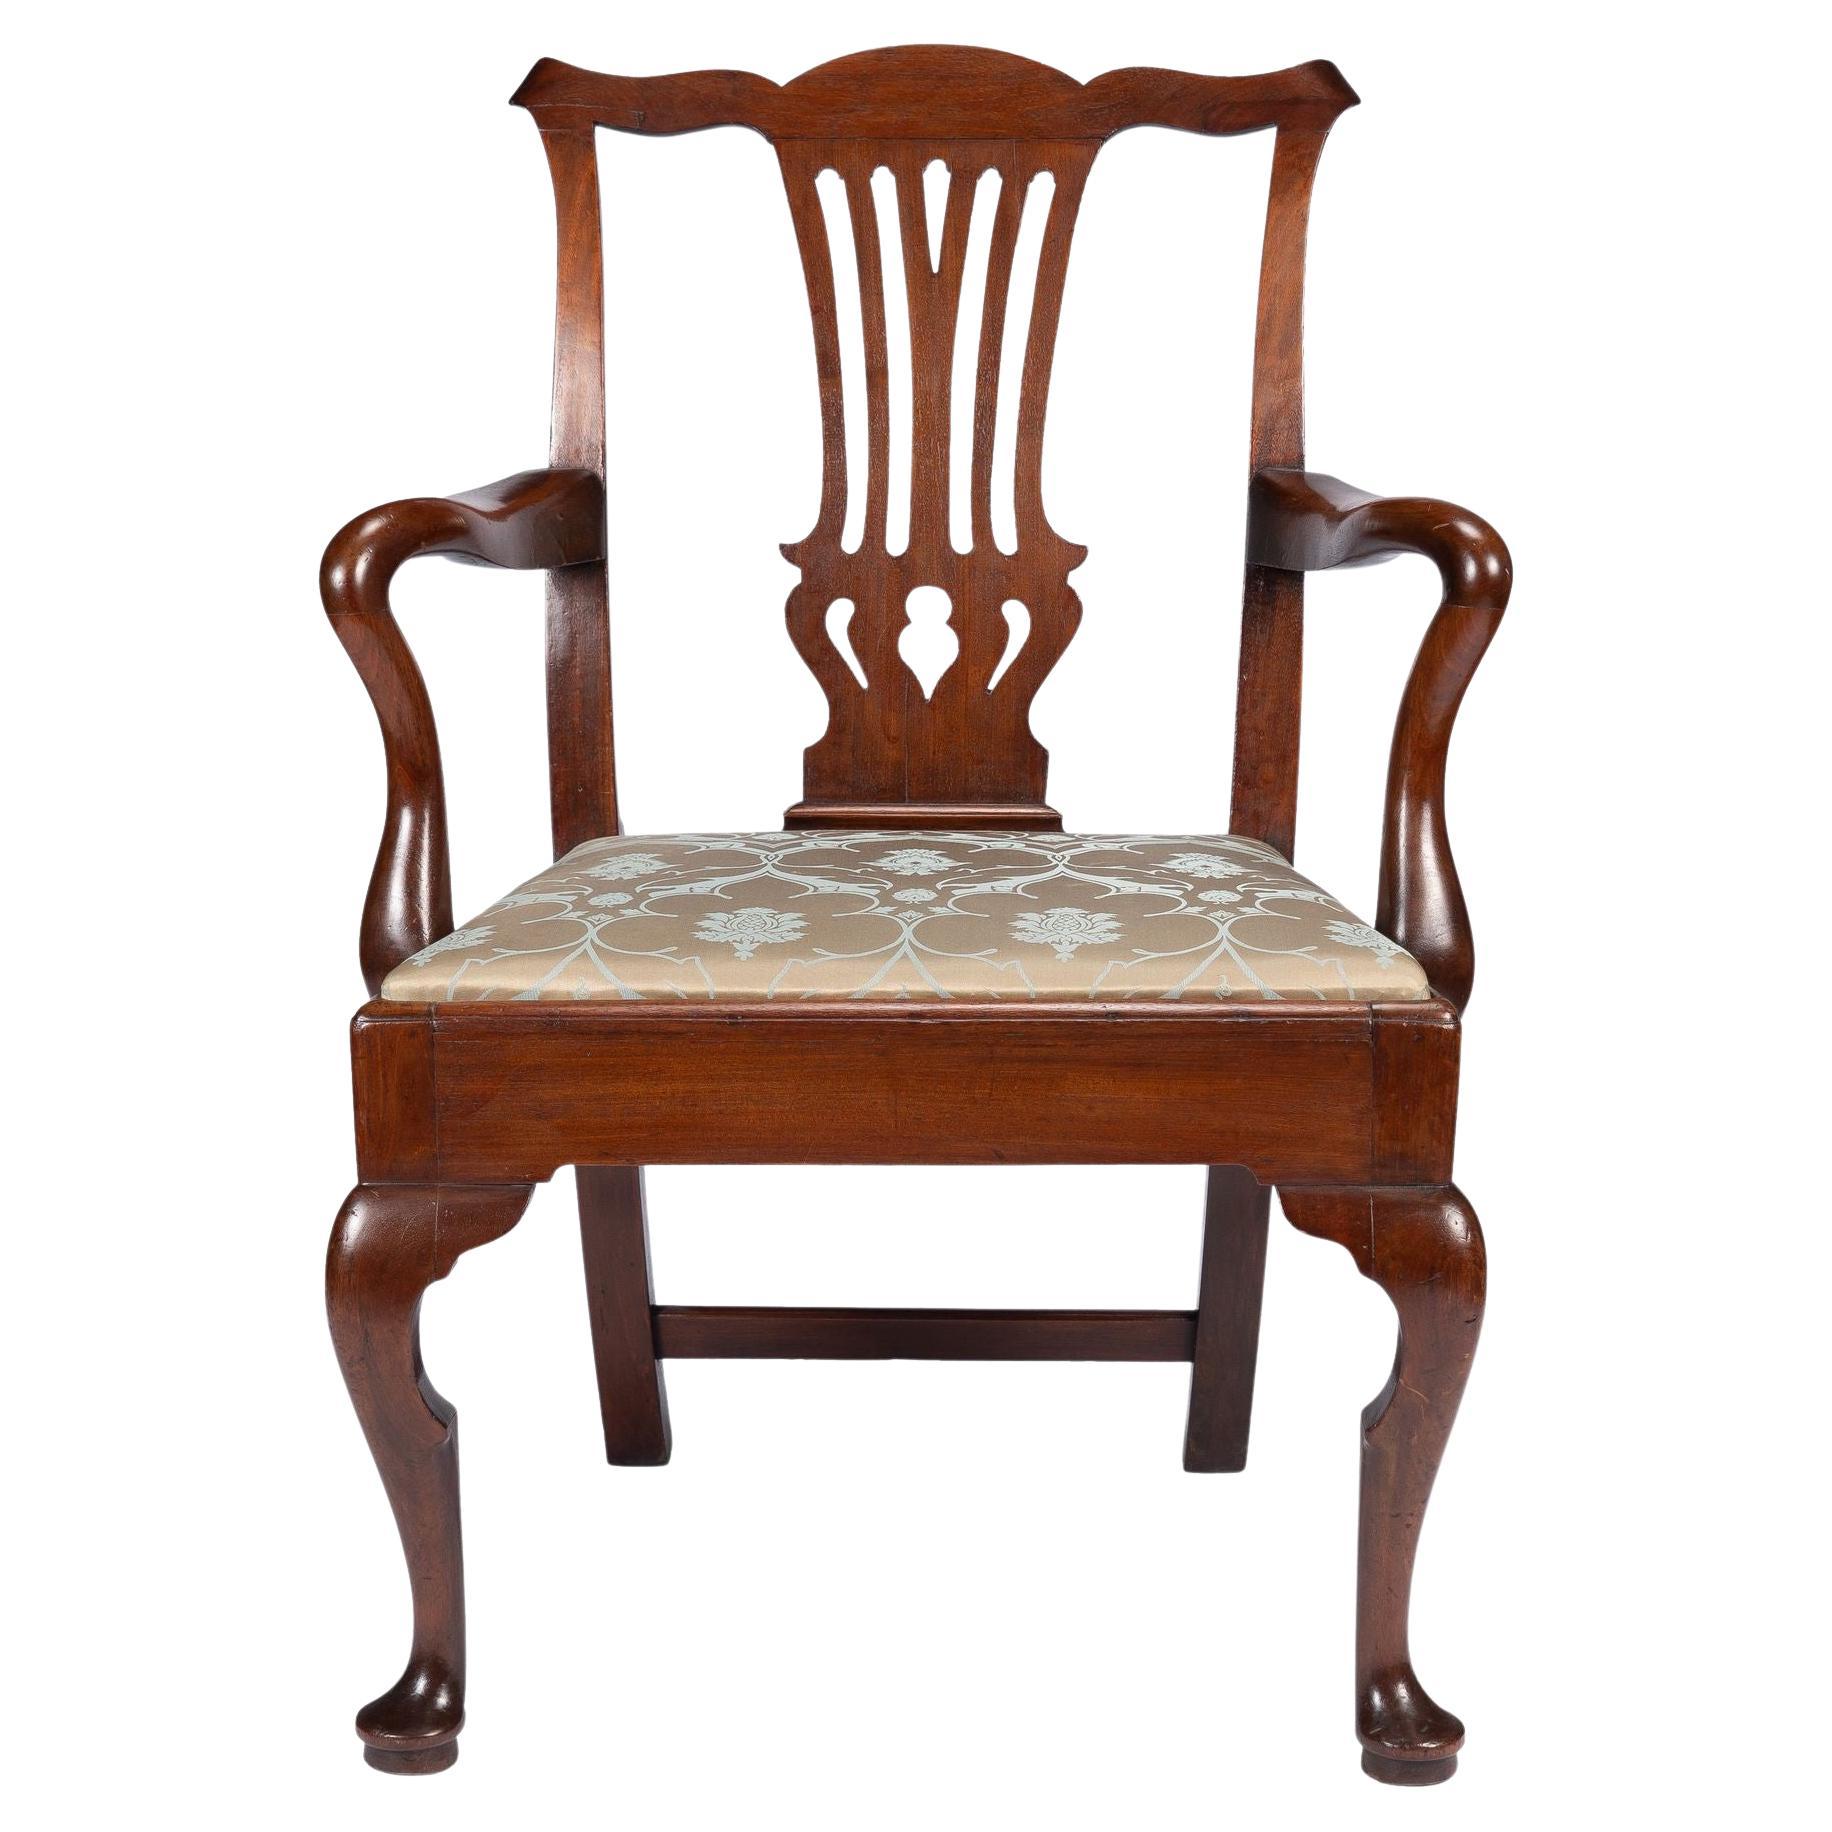 English George II Walnut Armchair with Upholstered Slip Seat, c. 1740 For Sale